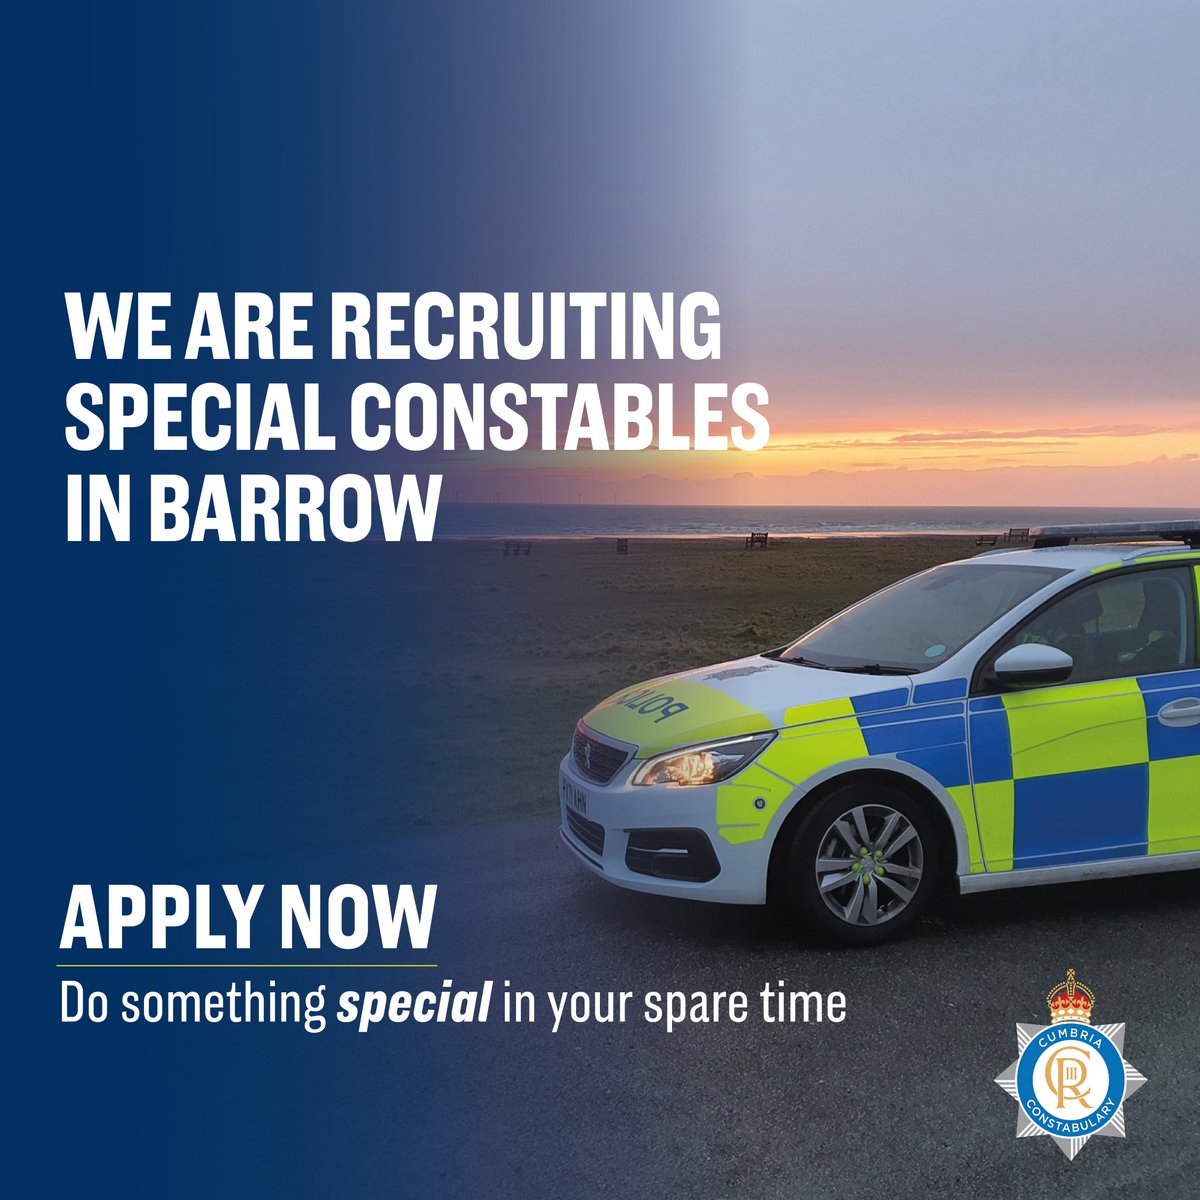 ❓ Do you want to do something special in your spare time? 📍 We are accepting applications for Special Constables in Barrow. 👮 Join us in #KeepingCumbriaSafe 👉 Are you interested and want to find out more? Visit orlo.uk/qBskT